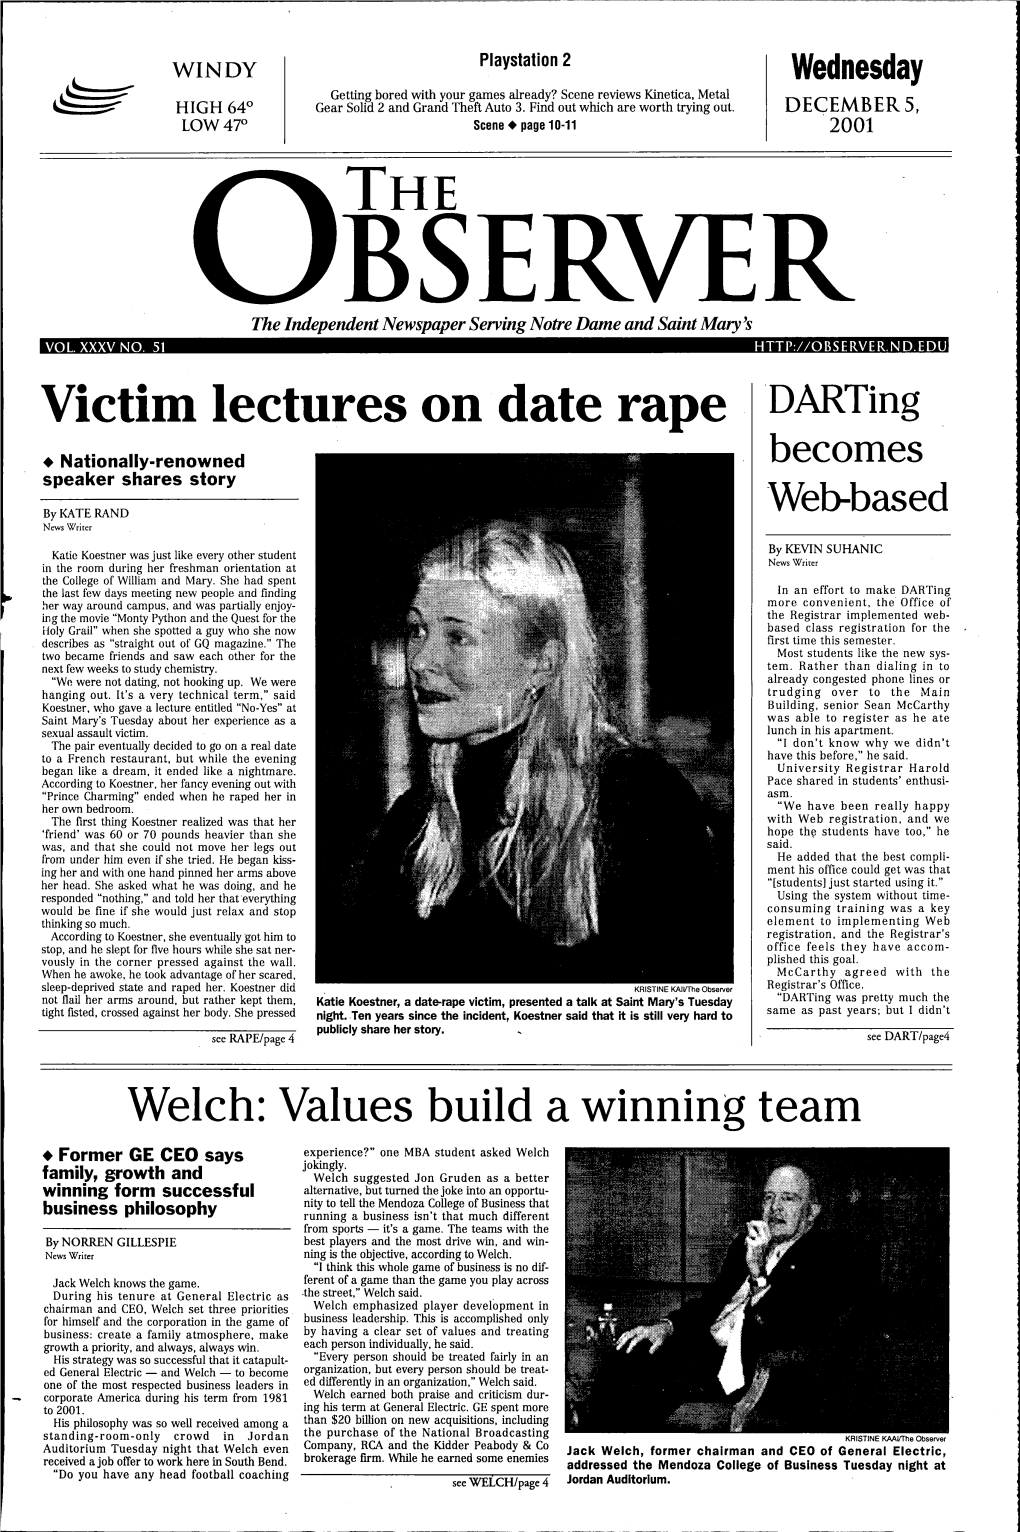 Victim Lectures on Date Rape 'Darting